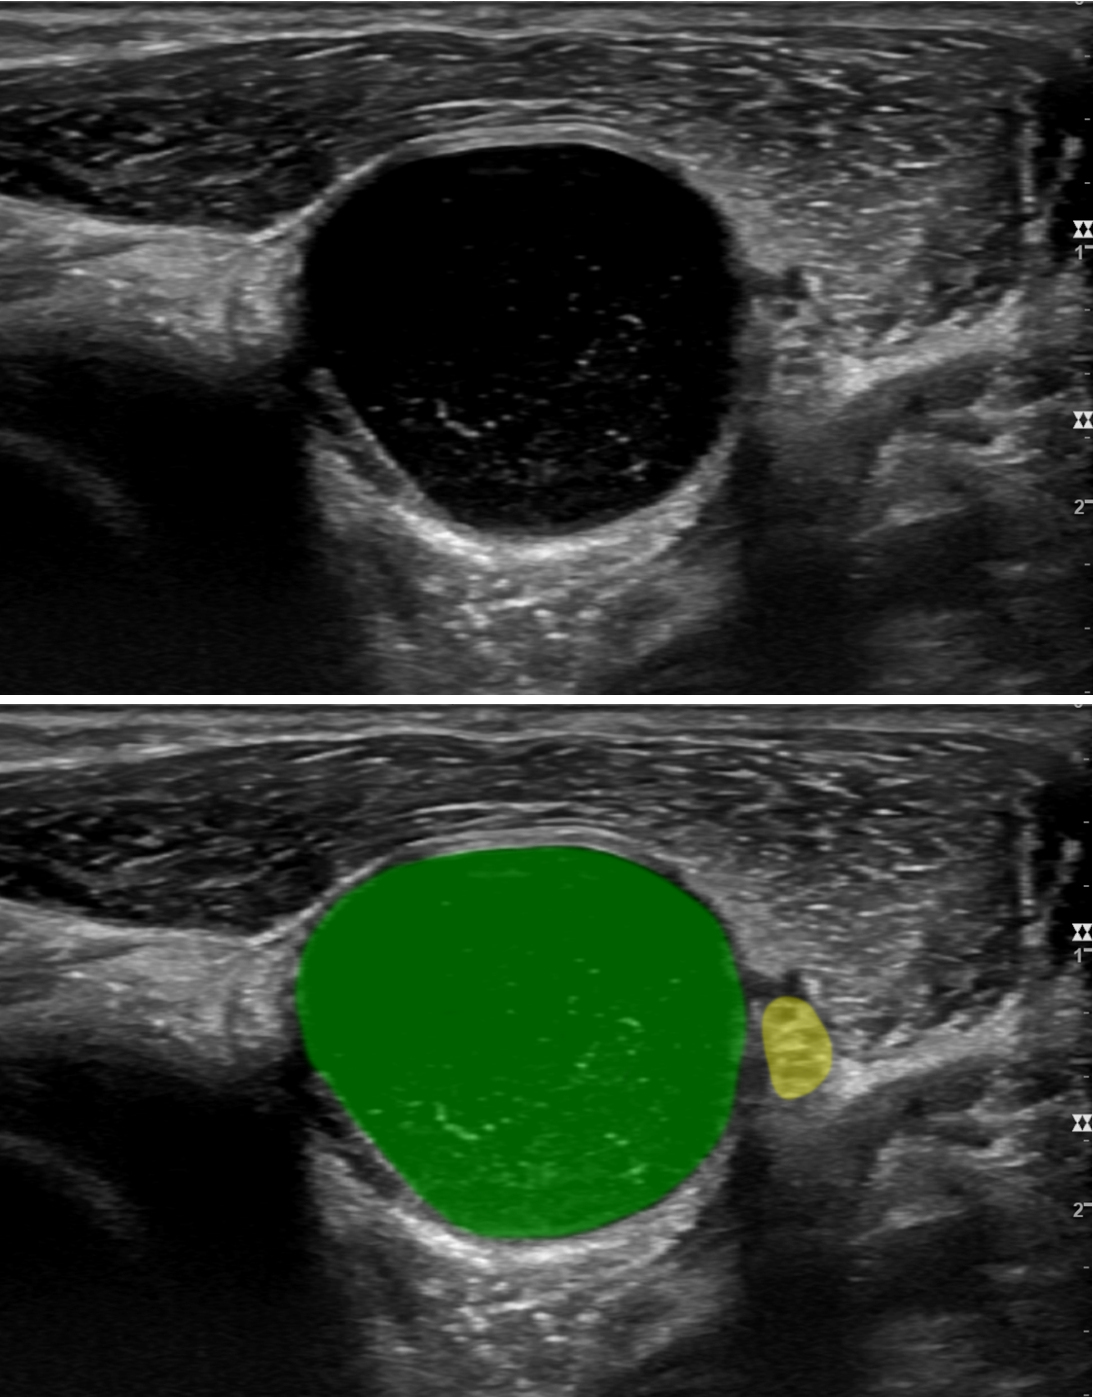 Image Caption: A large ganglion cyst (green) is displacing the radial nerve (yellow)  near the elbow.